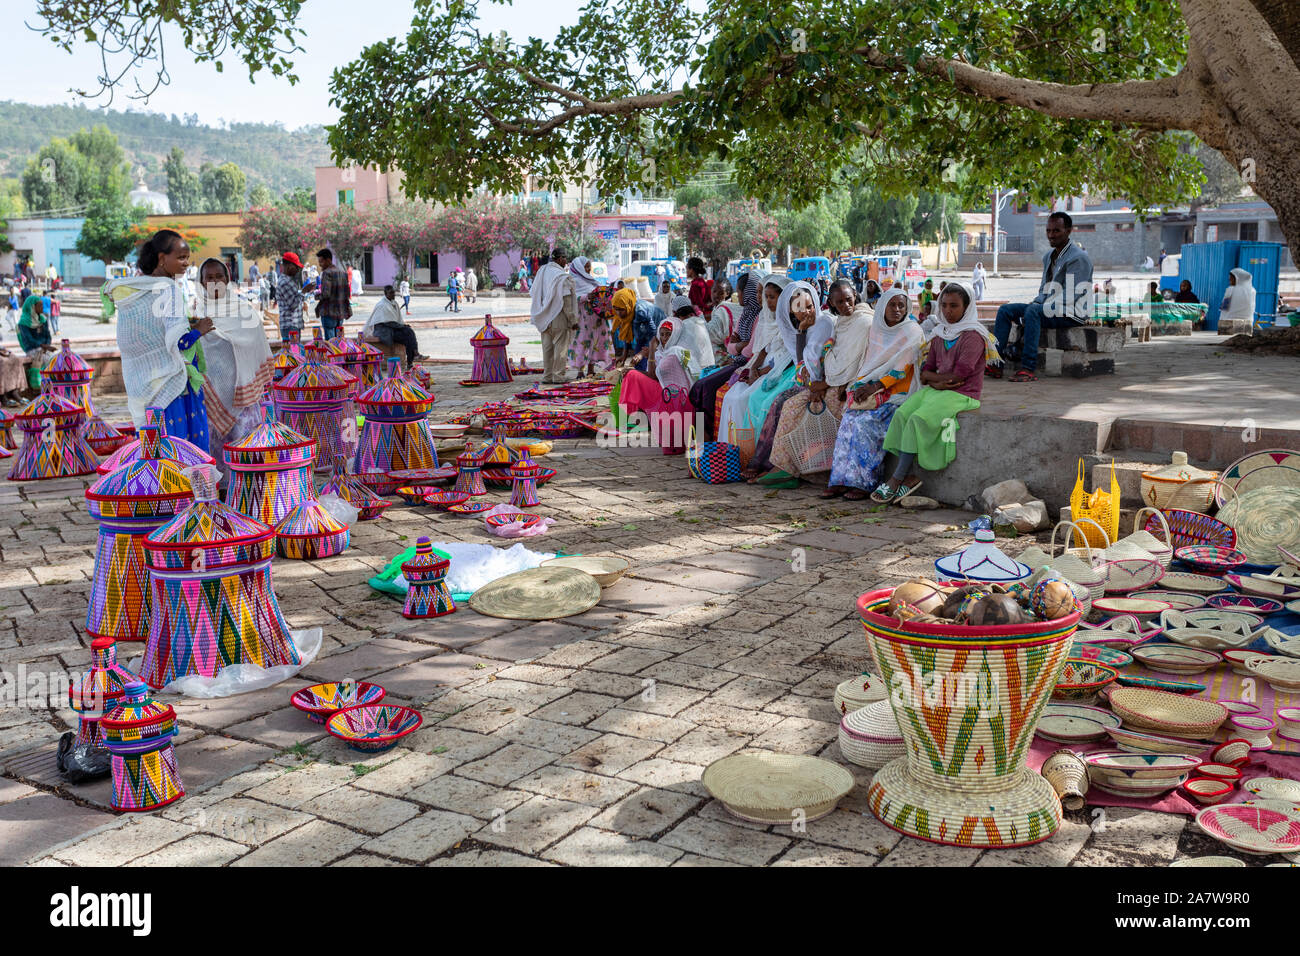 AXUM, ETHIOPIA, APRIL 27th.2019: Street market in center of Aksum, ethiopian women selling baskets in the traditional basket market on April 27, 2019 Stock Photo